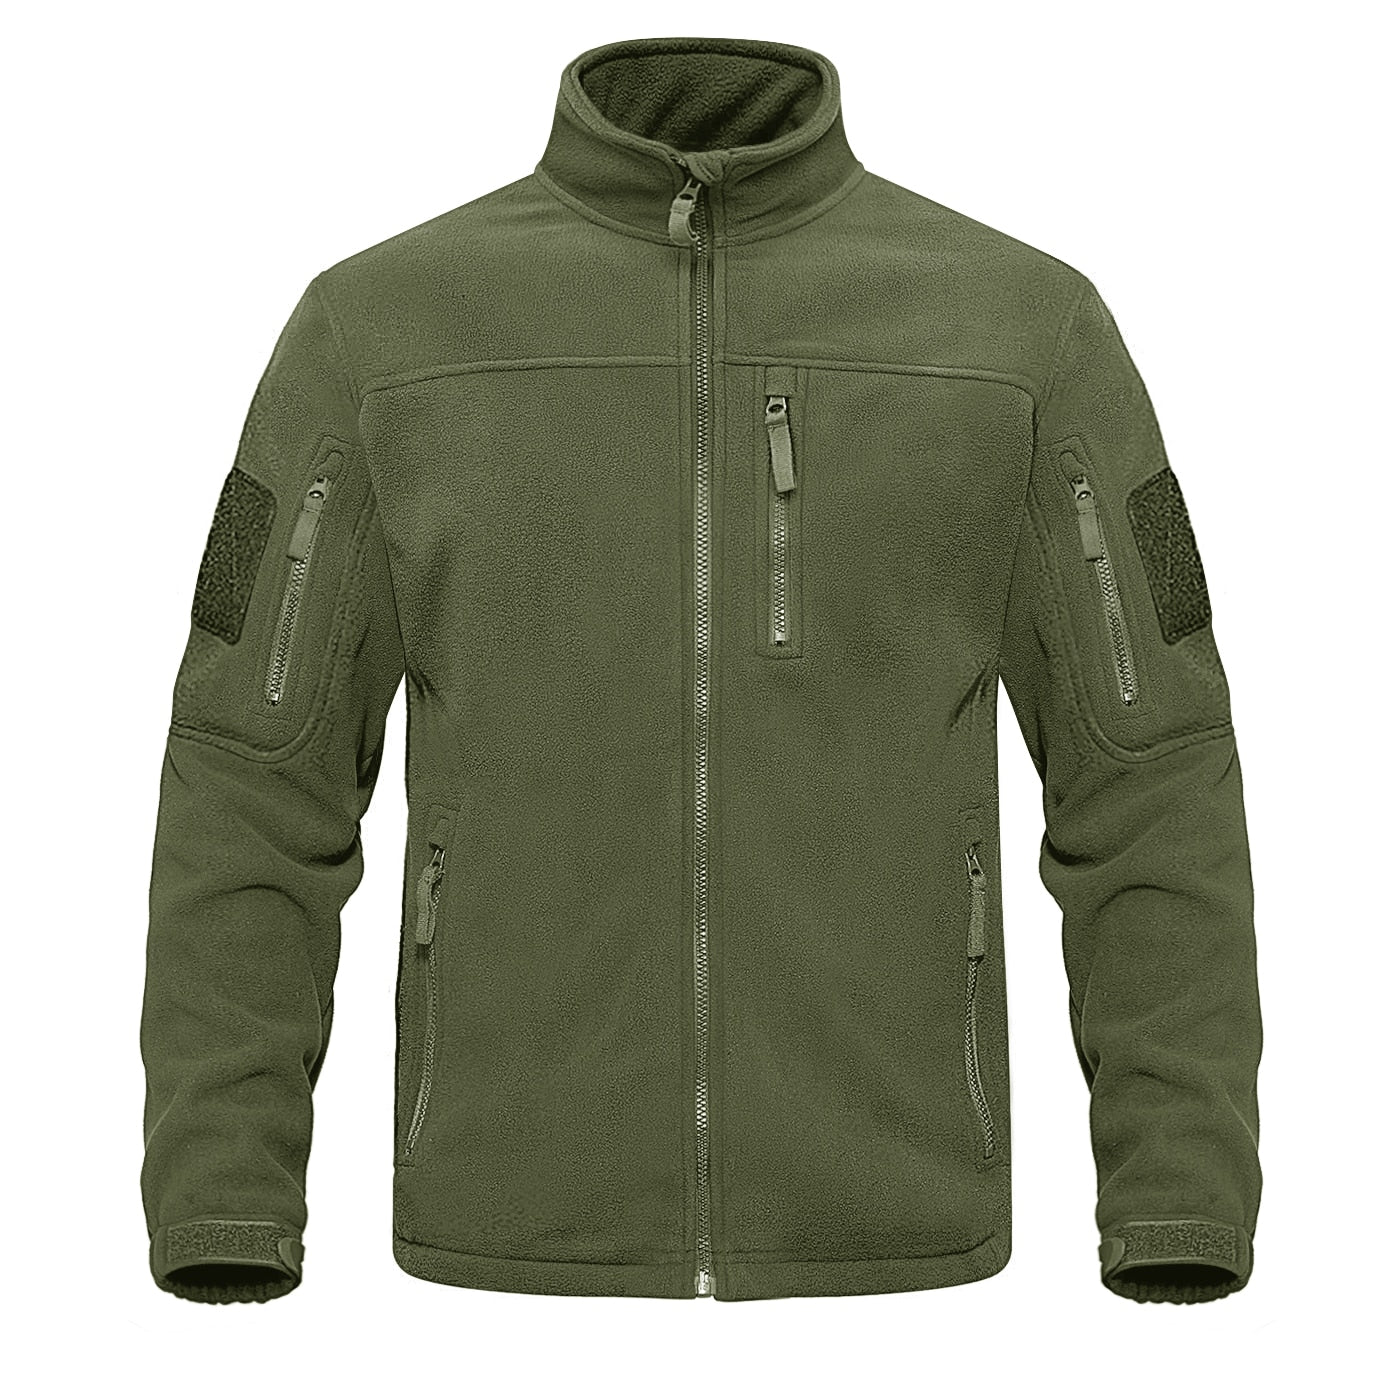 army green jacket for fishing 